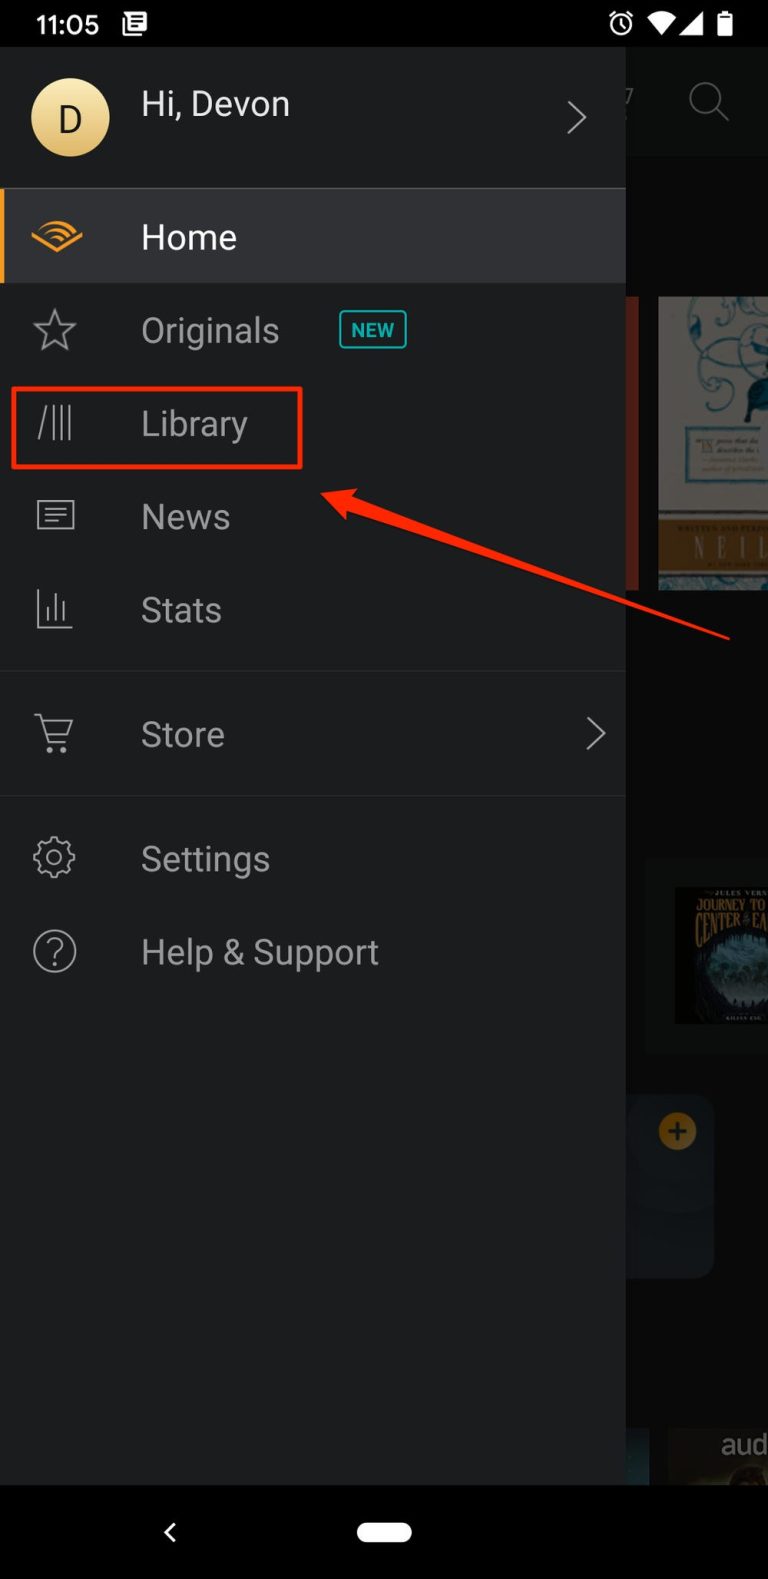 Can You Download Books On Audible?